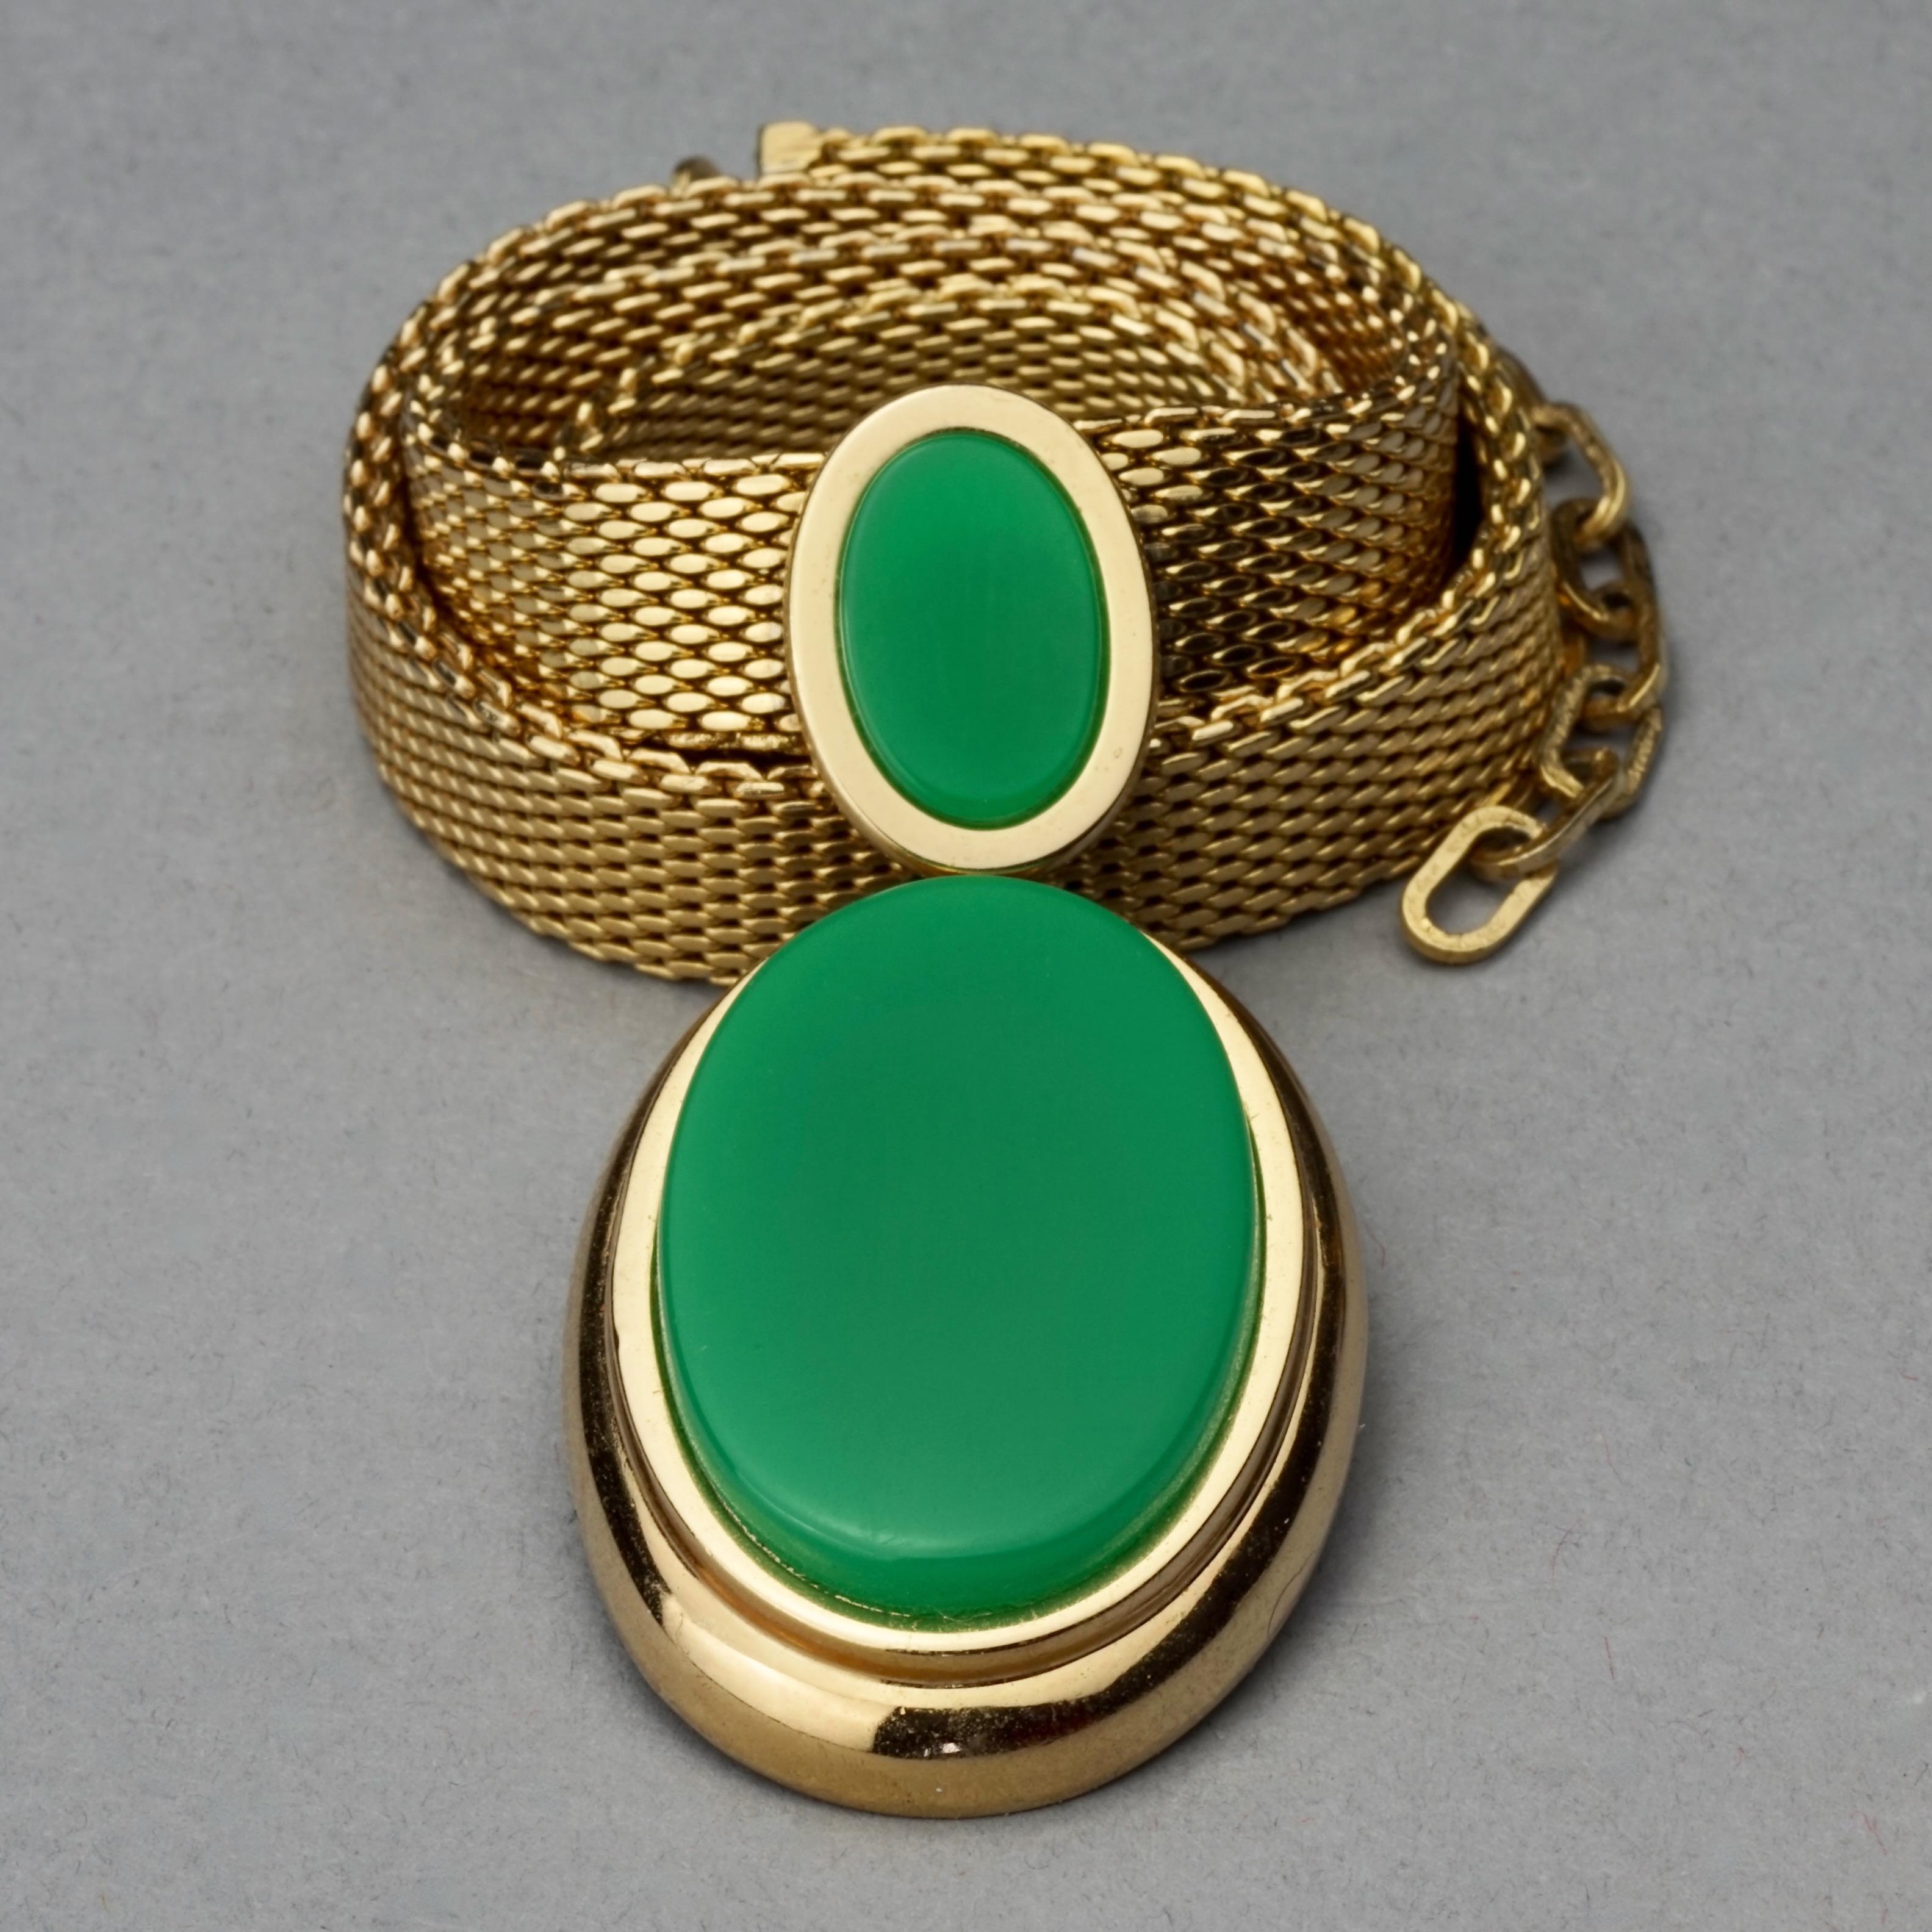 Vintage 1971 CHRISTIAN DIOR Double Oval Green Pendant Chain Necklace For Sale 4